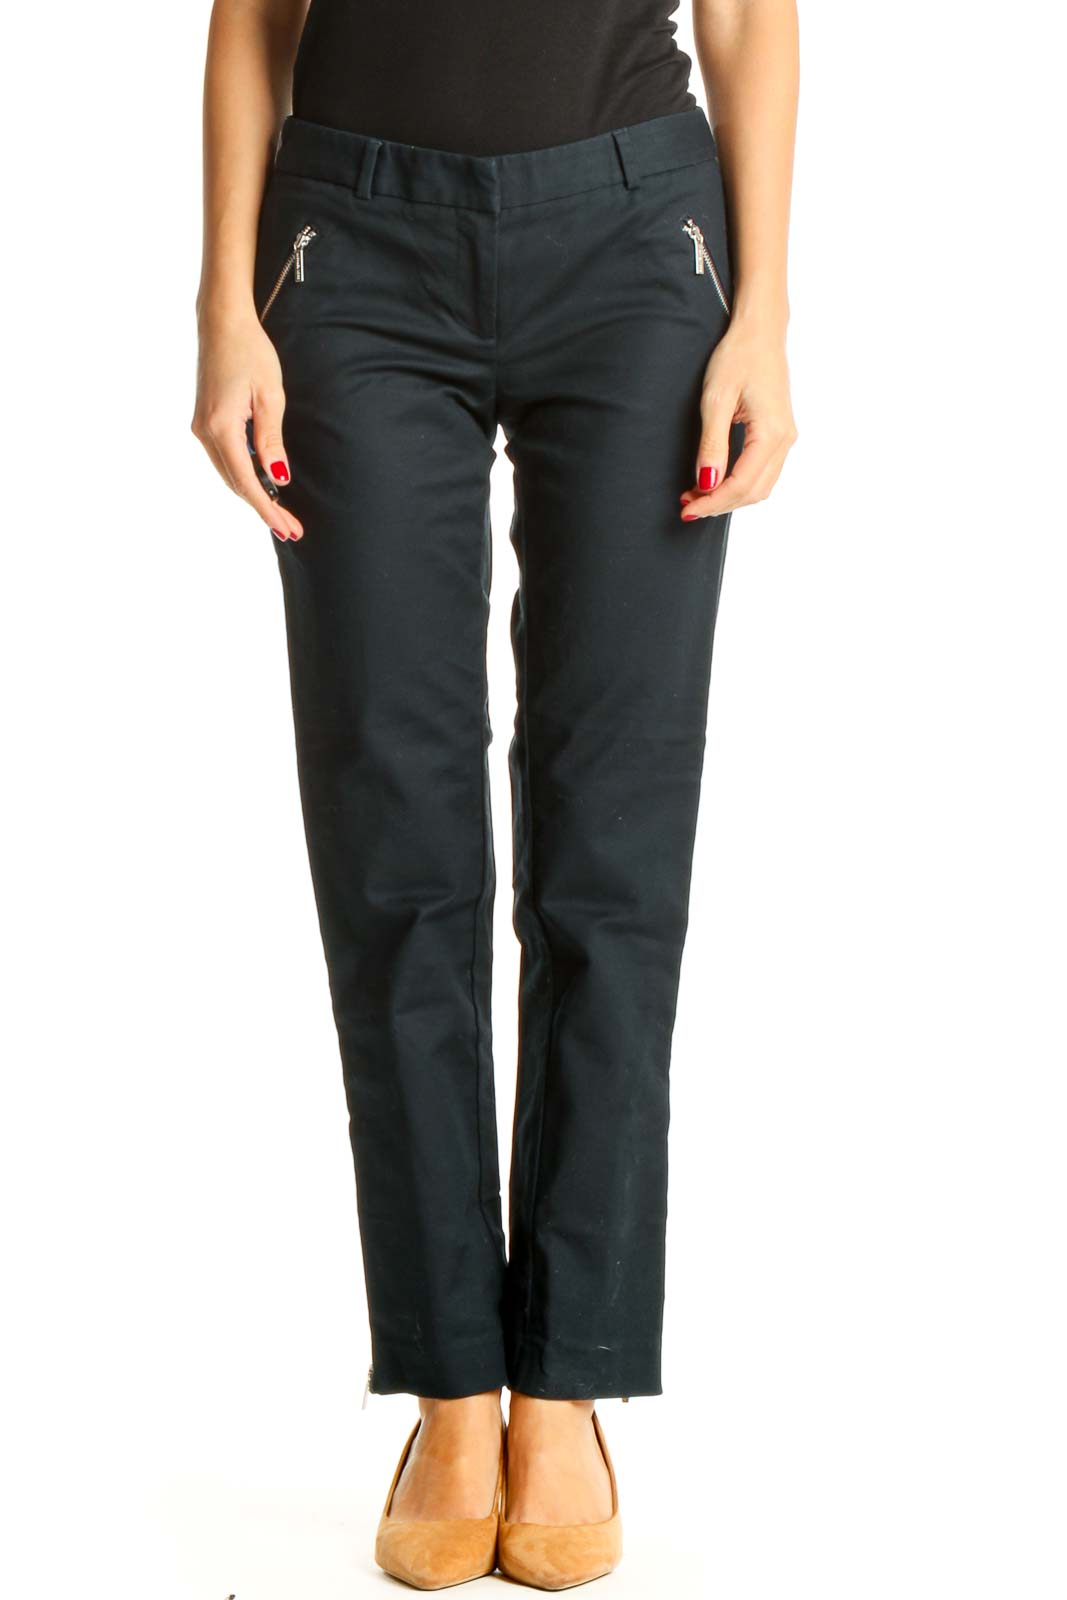 Blue Solid Casual Trousers Front